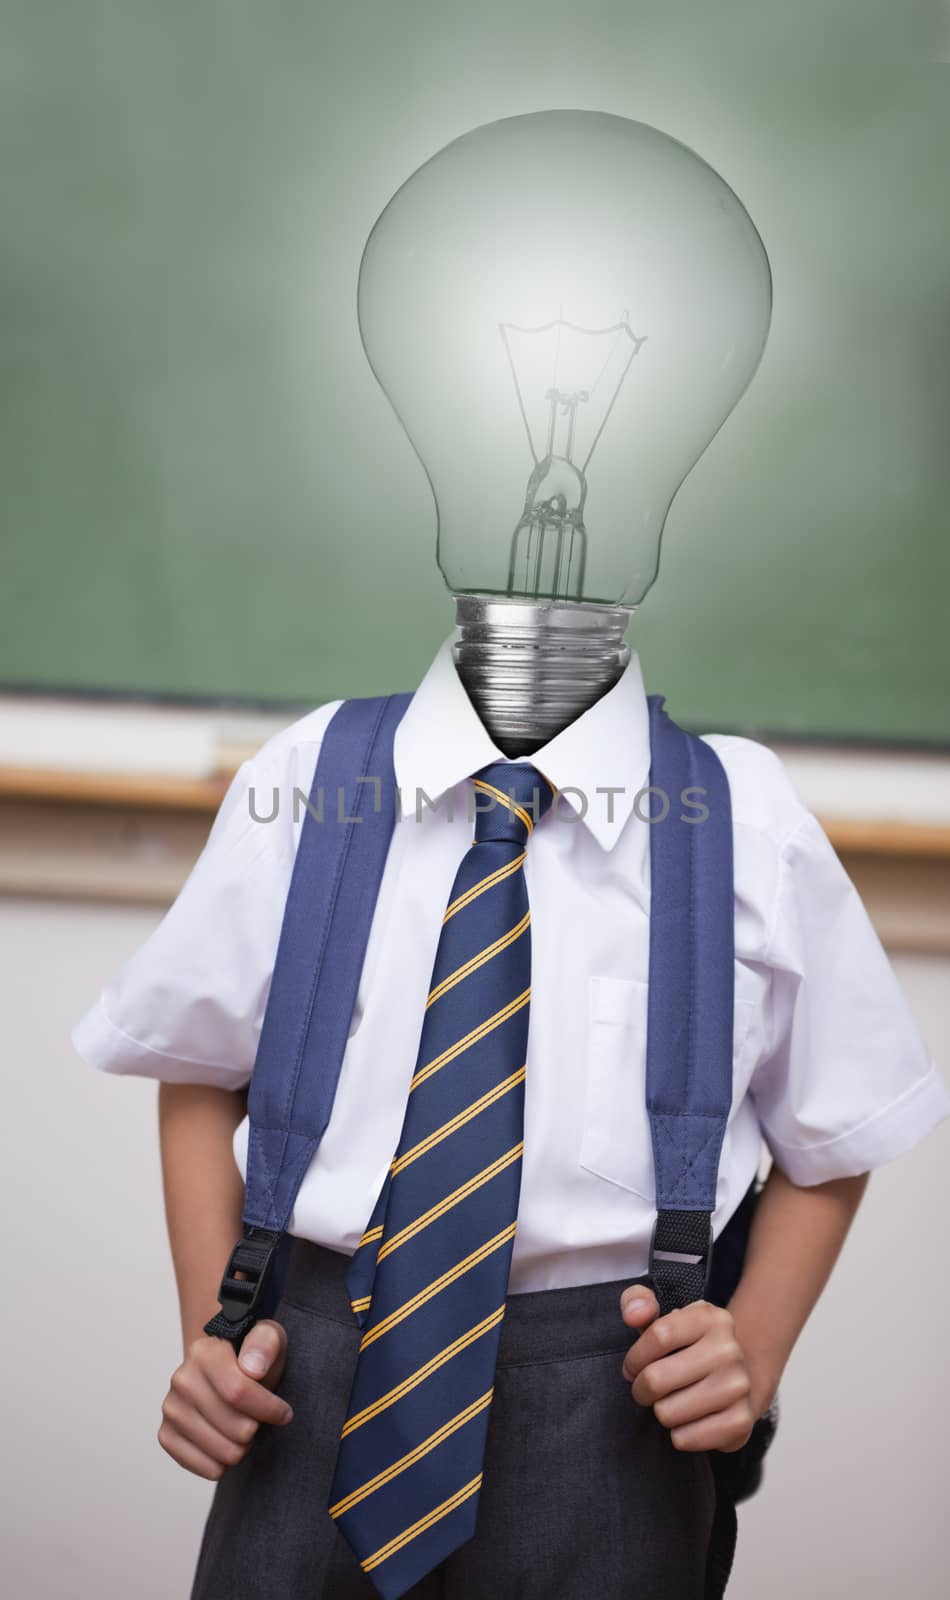 Pupil with light bulb instead of head by Wavebreakmedia